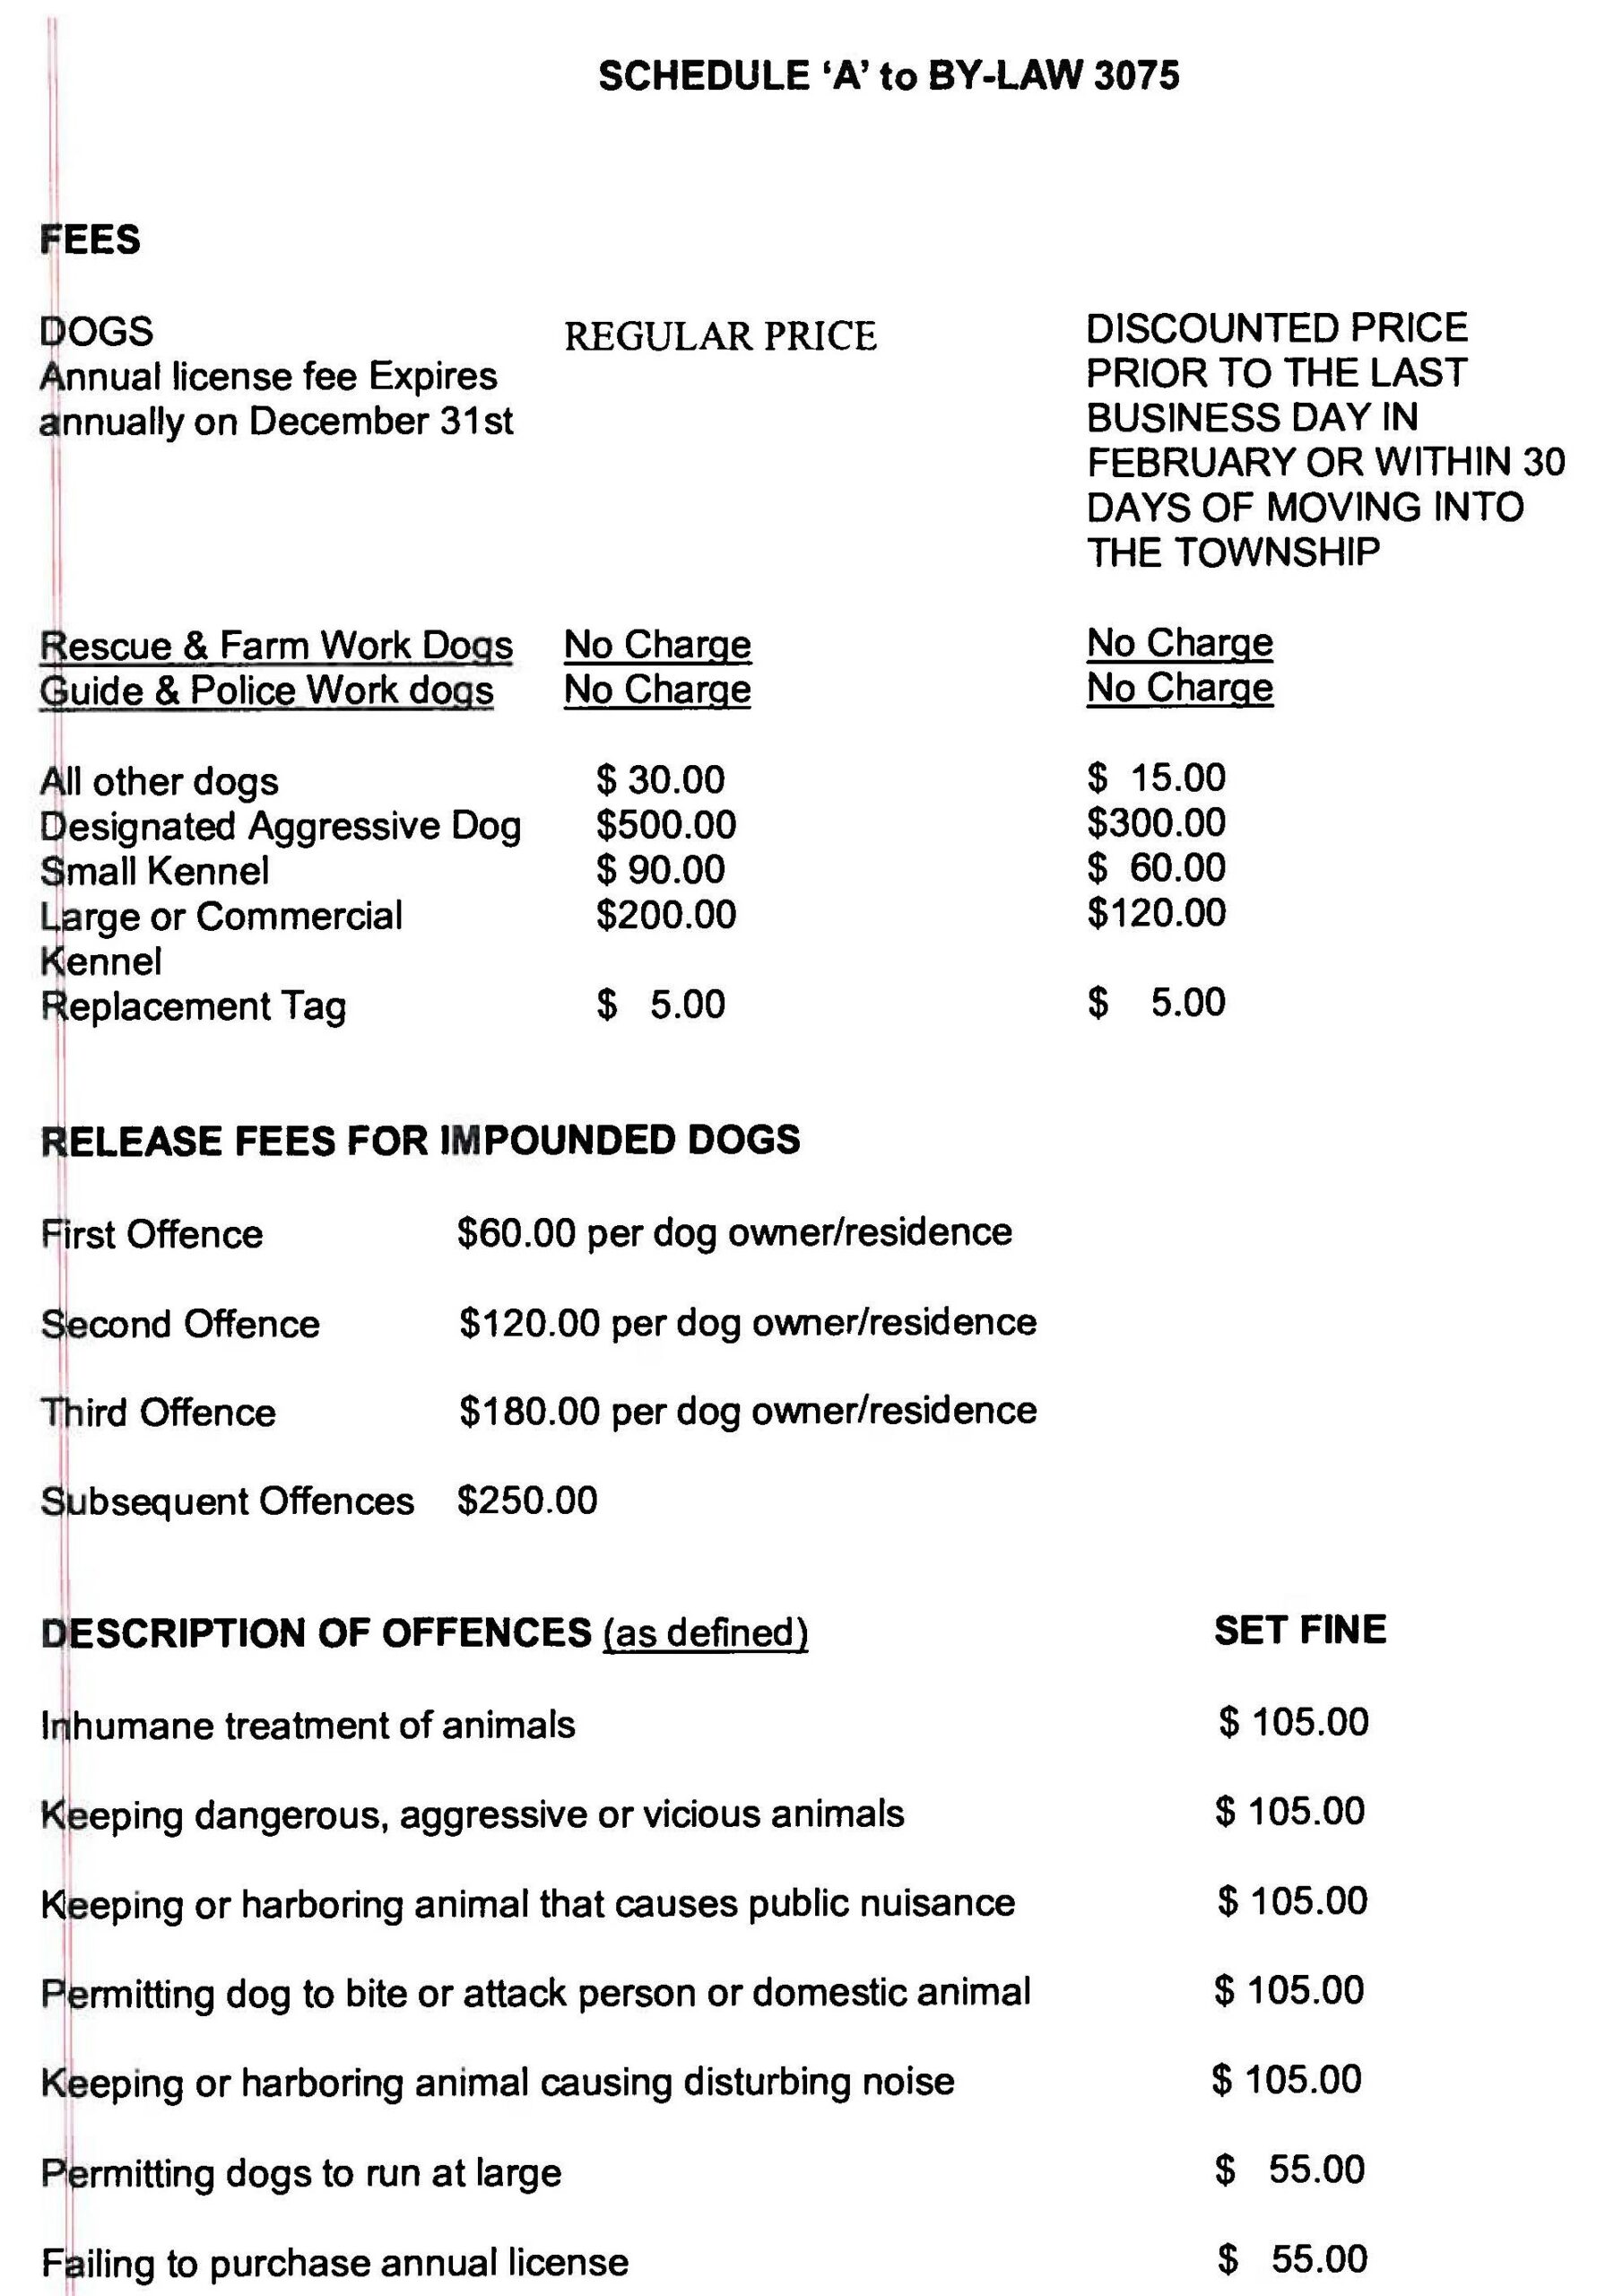 3075-2013 Canine Control Law Fees